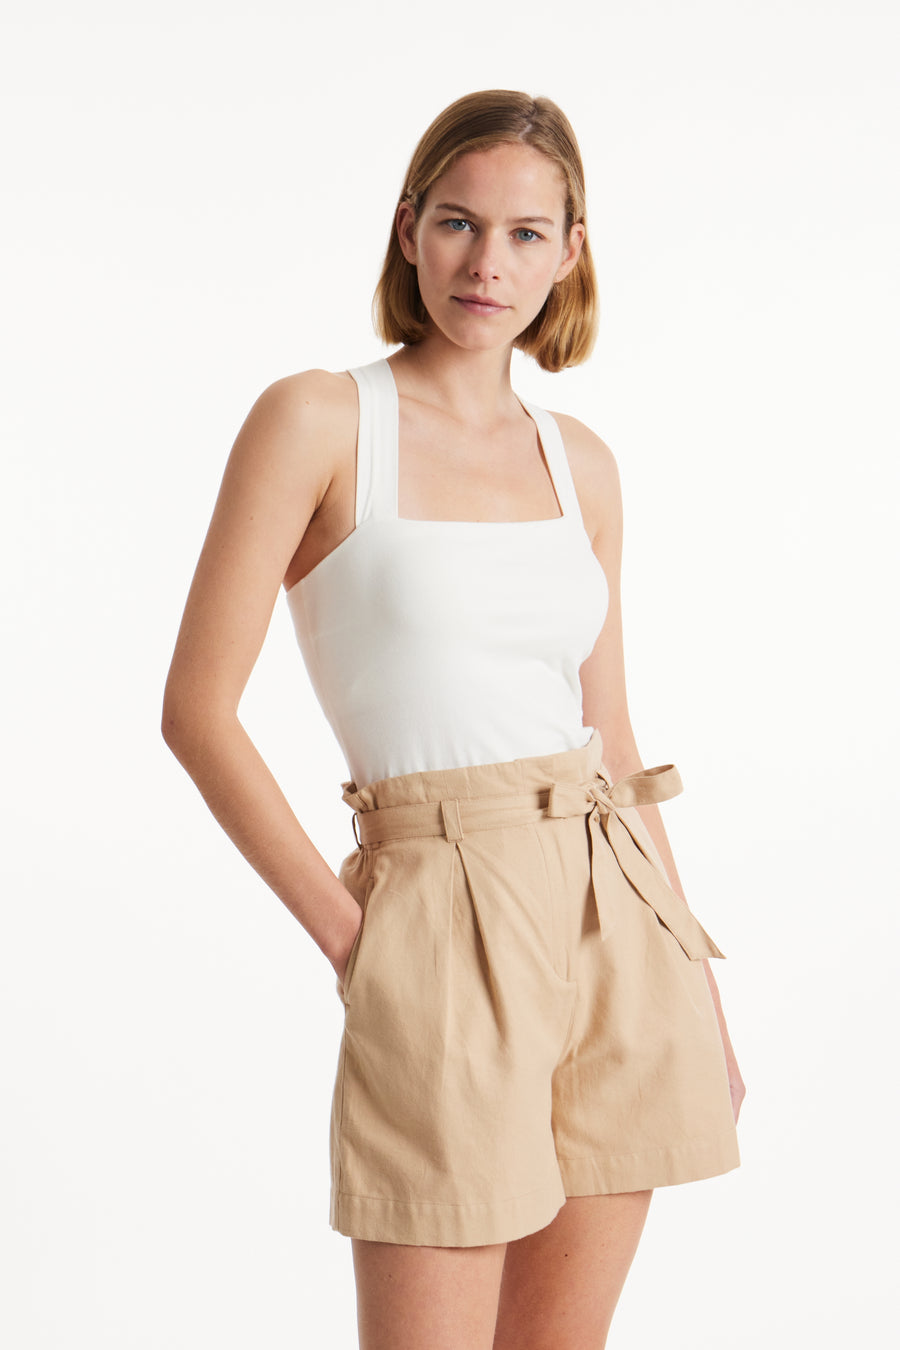 People Tree Fair Trade, Ethical & Sustainable Dorcas Shorts in Sand 100% Organic Cotton